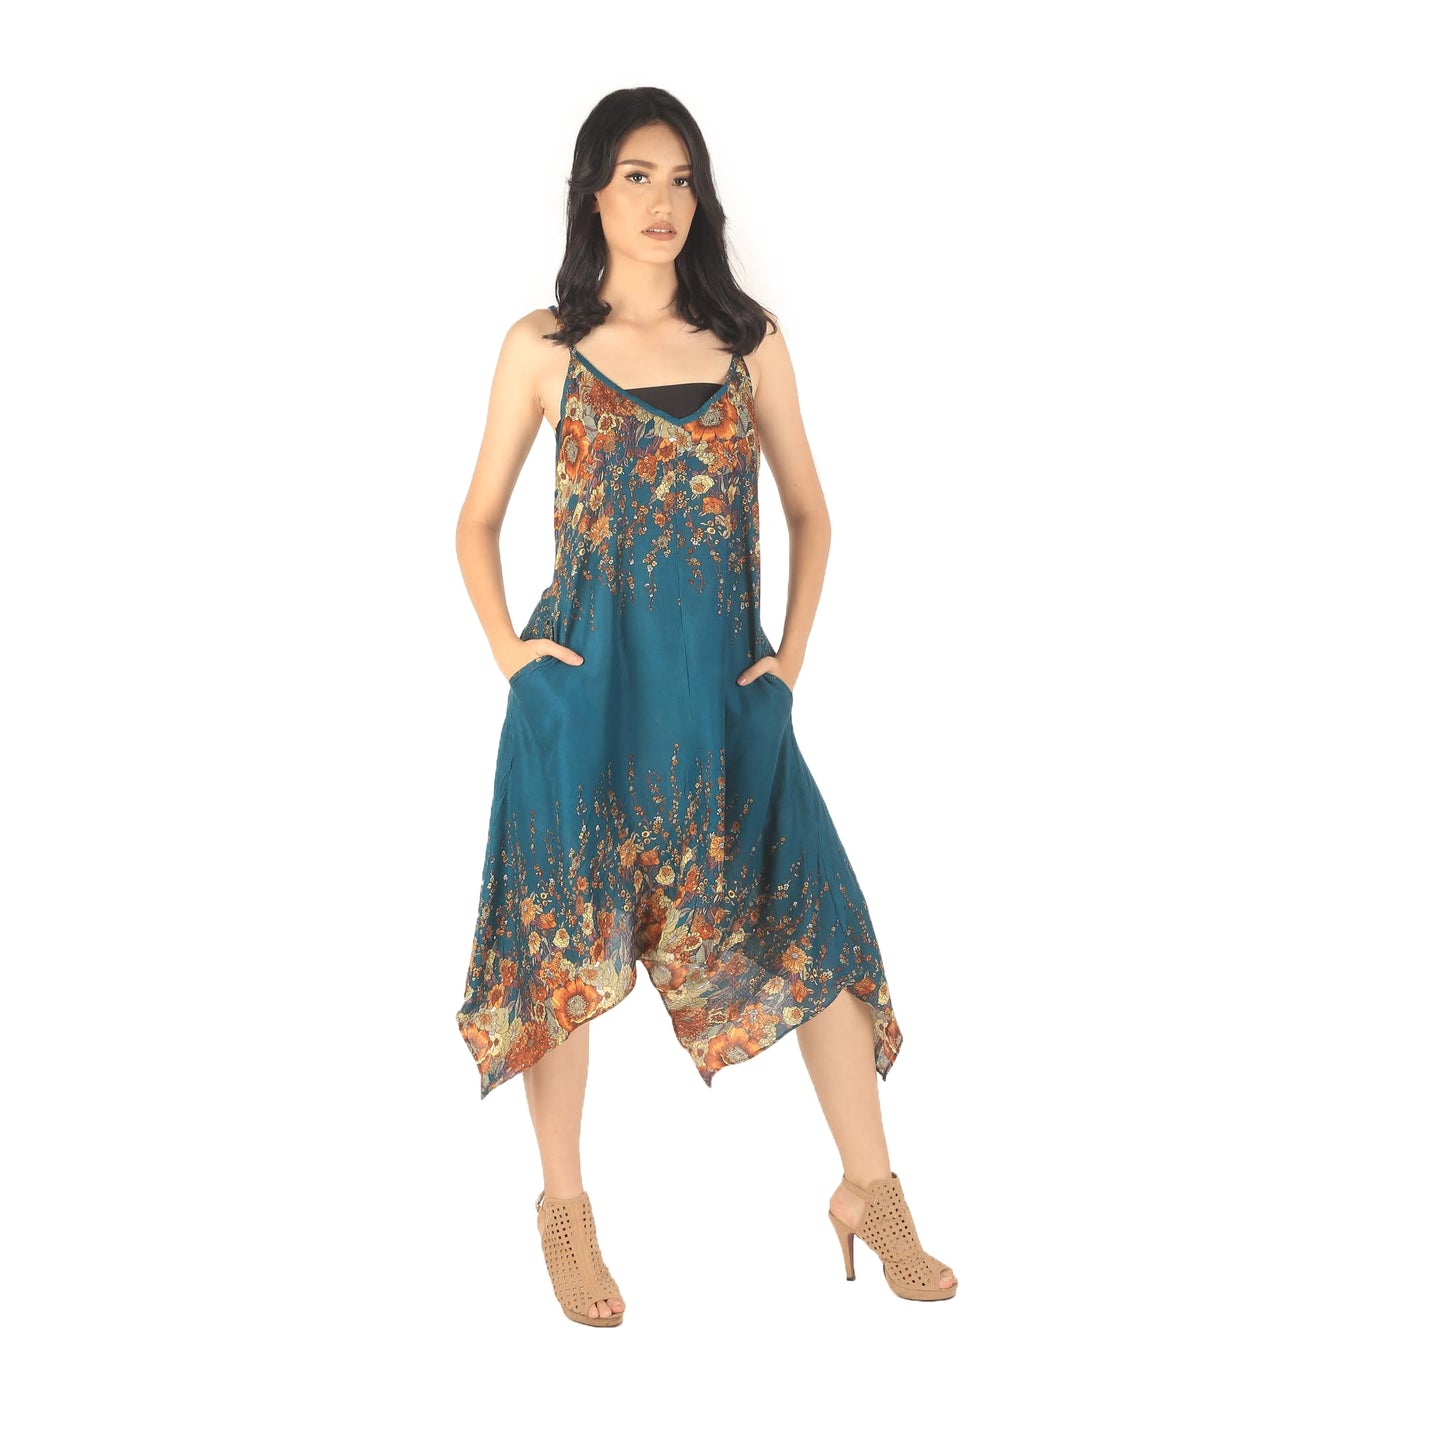 Floral Royal Women's Mini Dresses in Ocean DR0399 020010 07 Women in Ocean dress Details of dress ( crewneck, Sleeveless,Floral Print, 2 side pockets , backless,flowy , Spaghetti Straps )